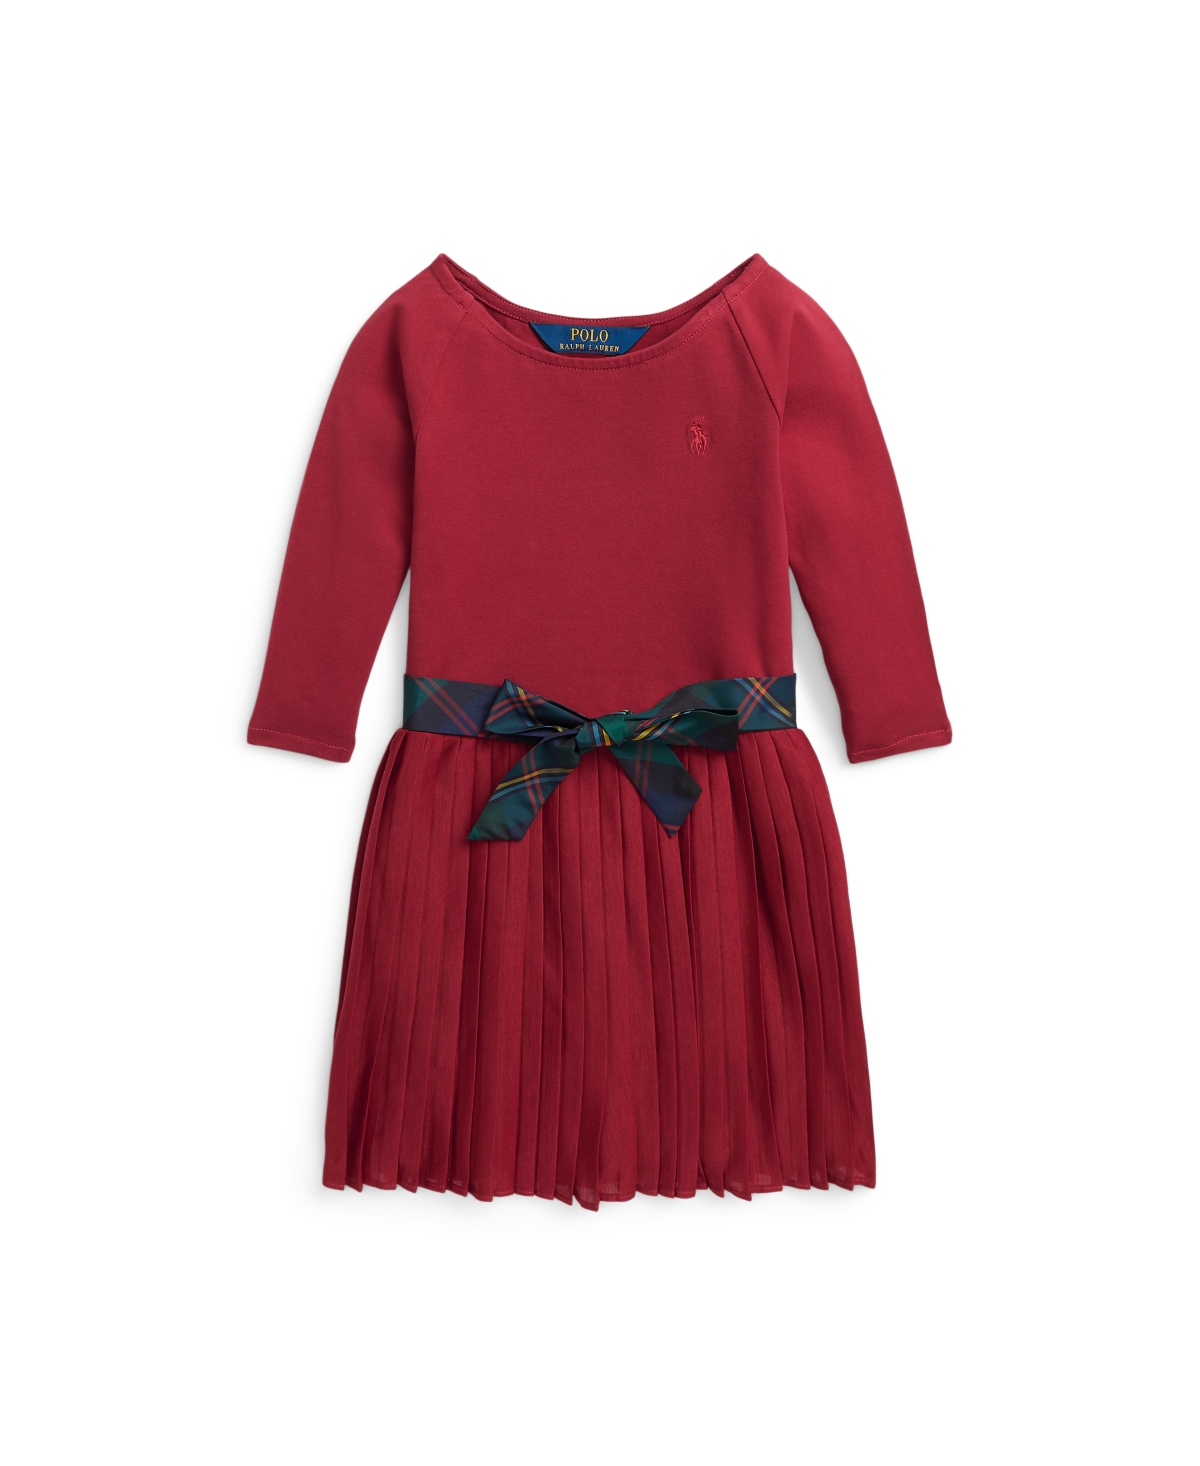 Polo Ralph Lauren Kids' Big Girls Pleated Stretch Jersey Dress In Holiday Red